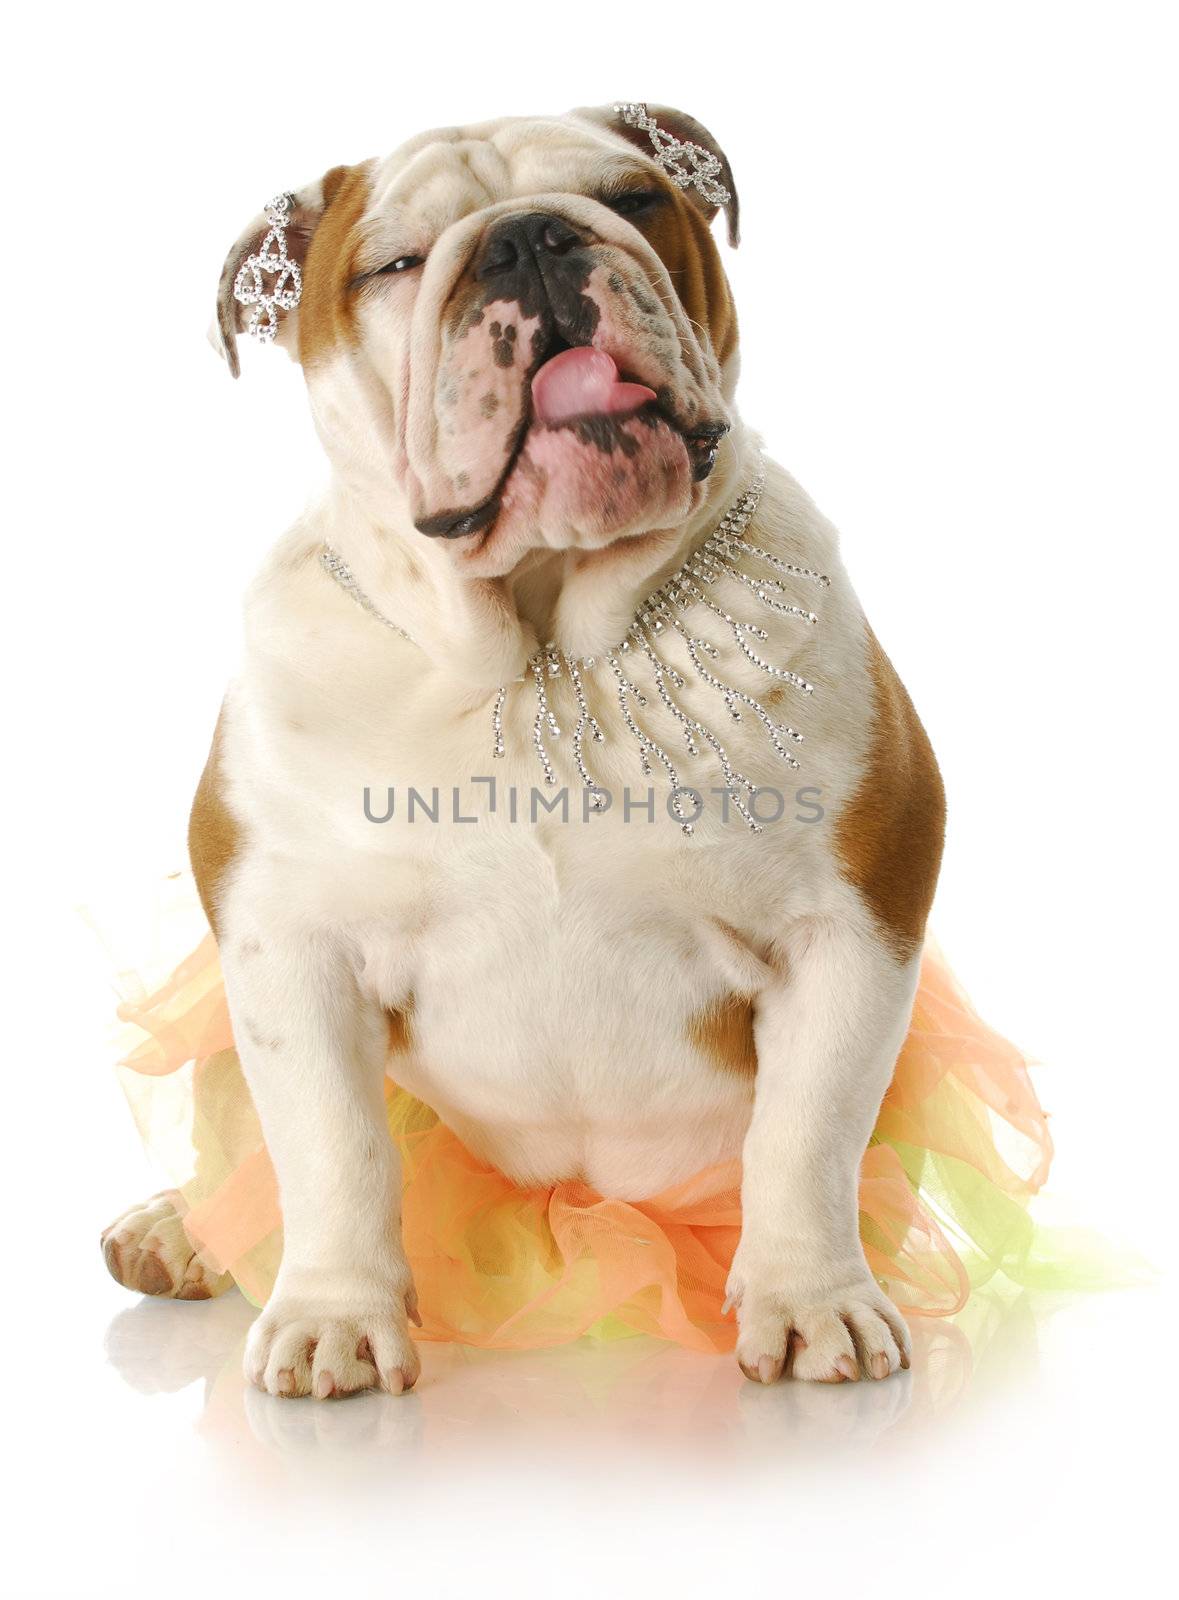 adorable english bulldog dressed up wearing shirt and fancy jewellry with reflection on white background